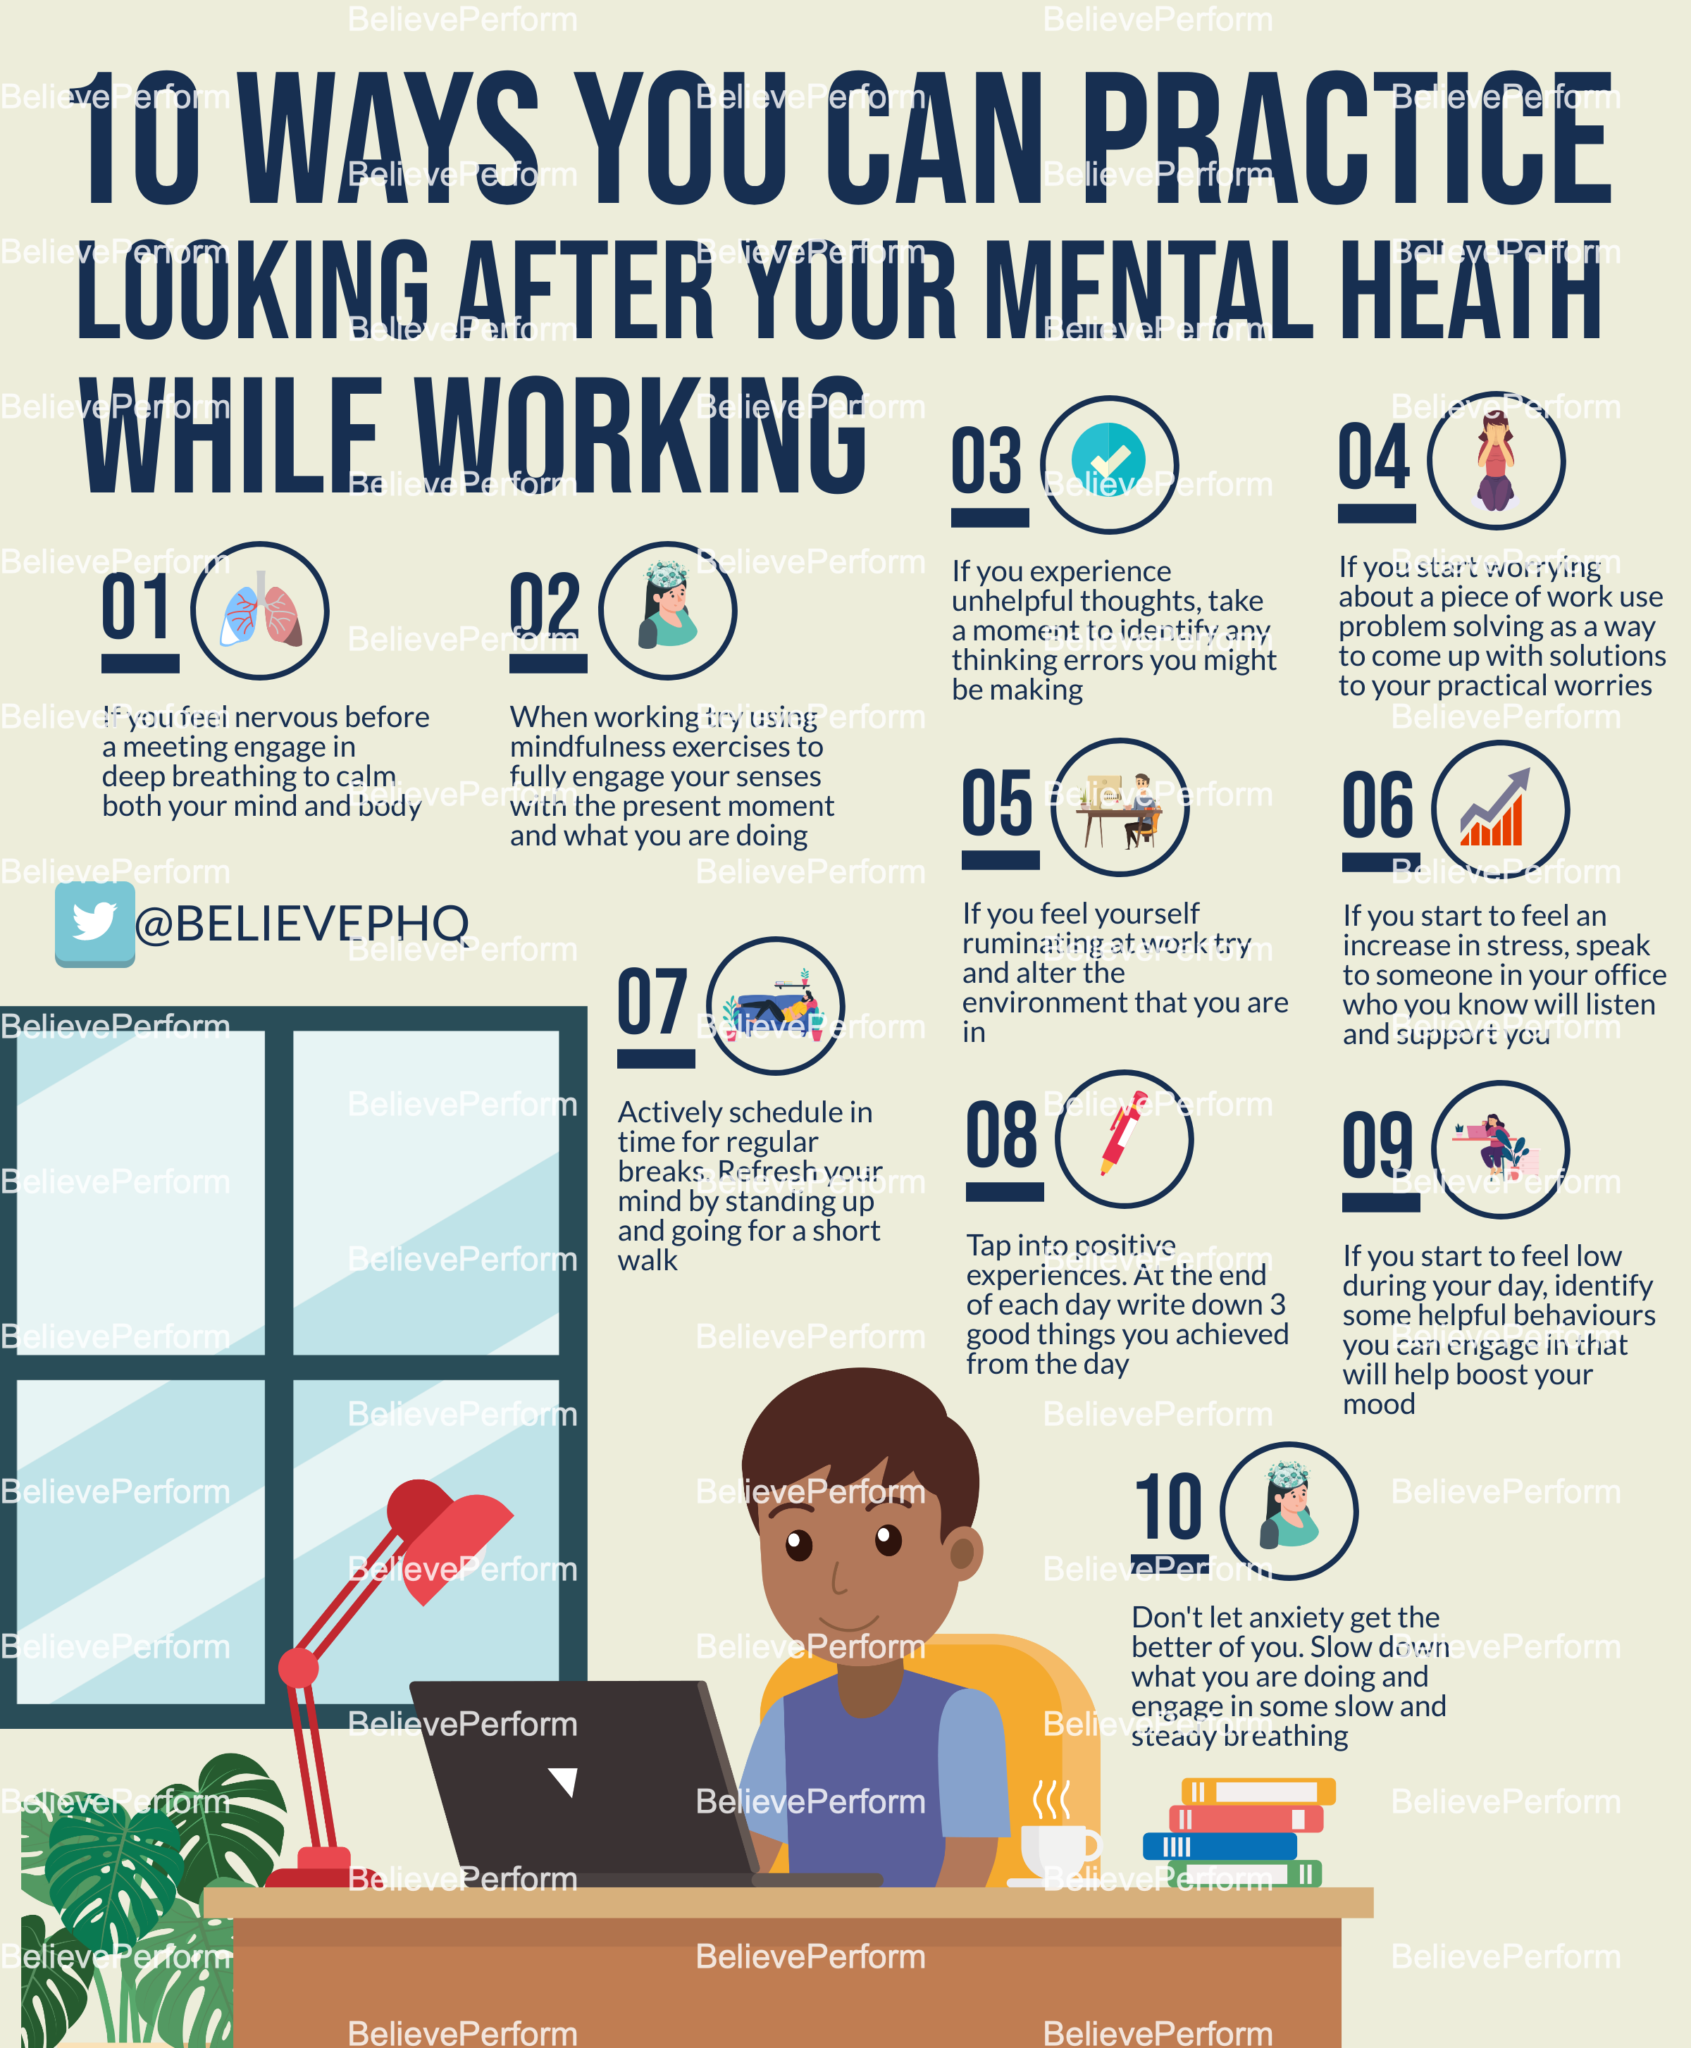 10-ways-you-can-practice-looking-after-your-mental-health-while-working